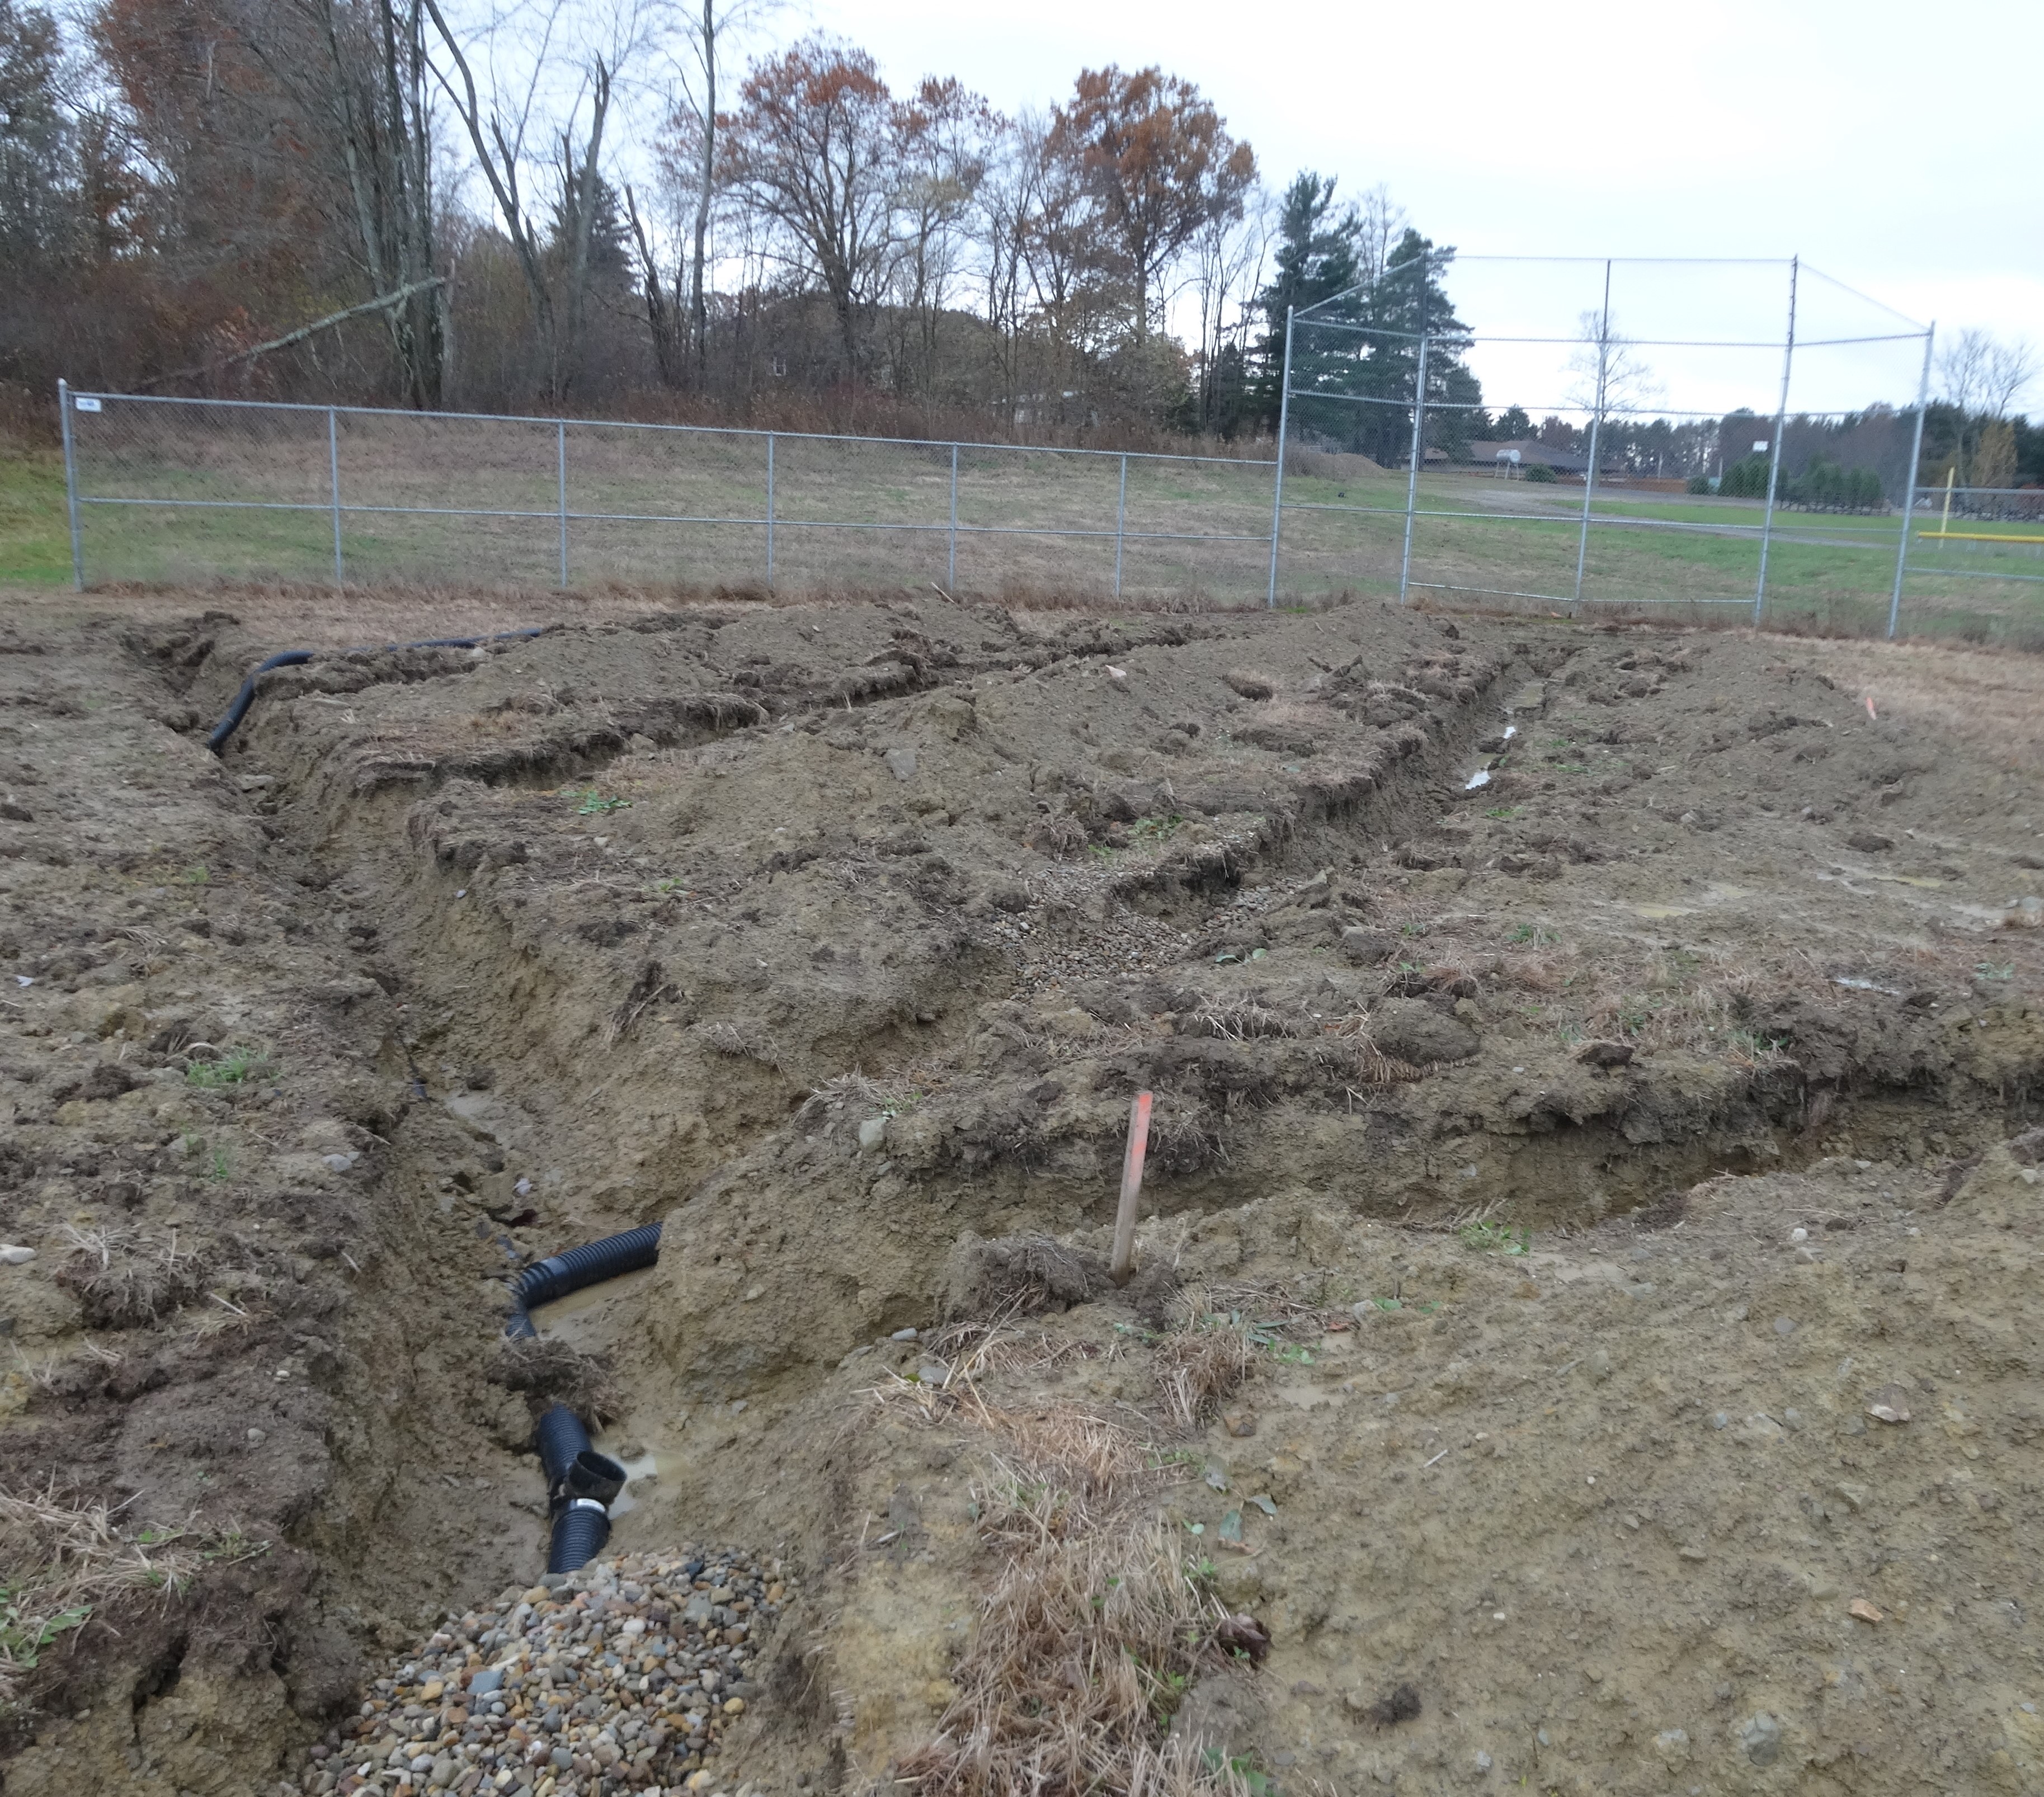 Brookfield Youth Baseball and Softball Inc. is installing drains at the unfinished fields at Brookfield Township Park.